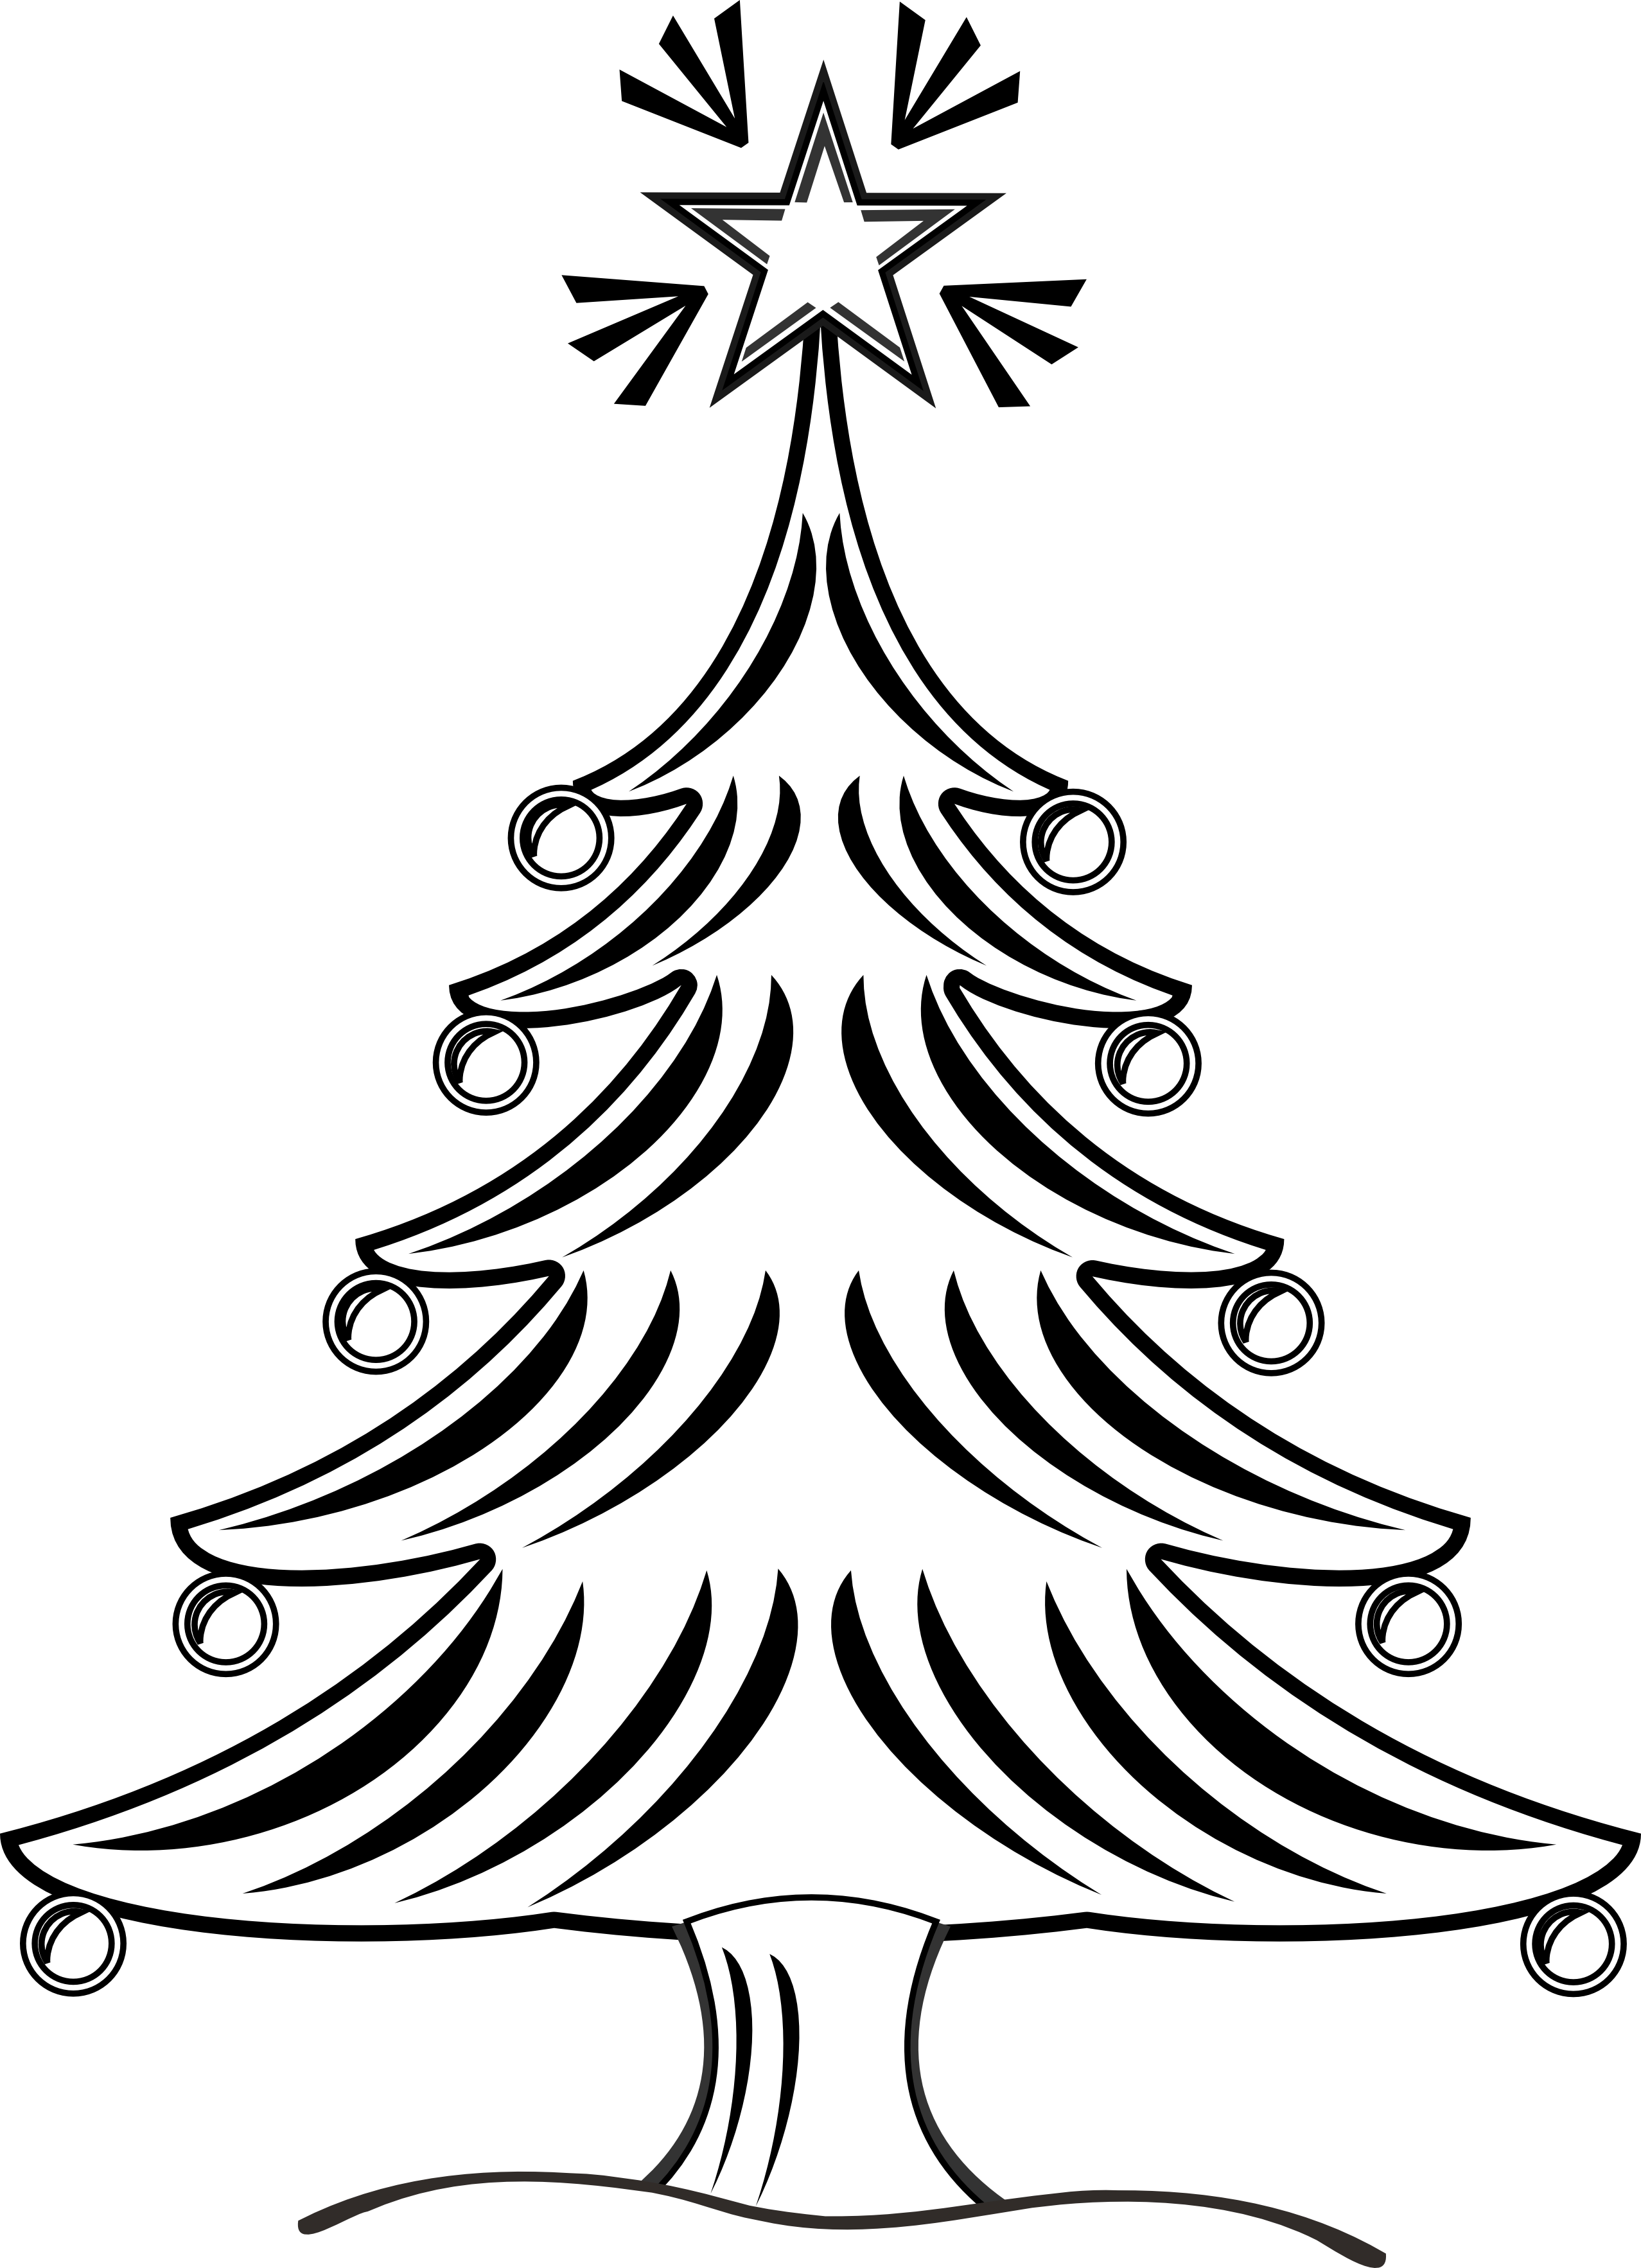 Free Christmas Tree Drawing S, Download Free Clip Art, Free Clip Art on Clipart Library